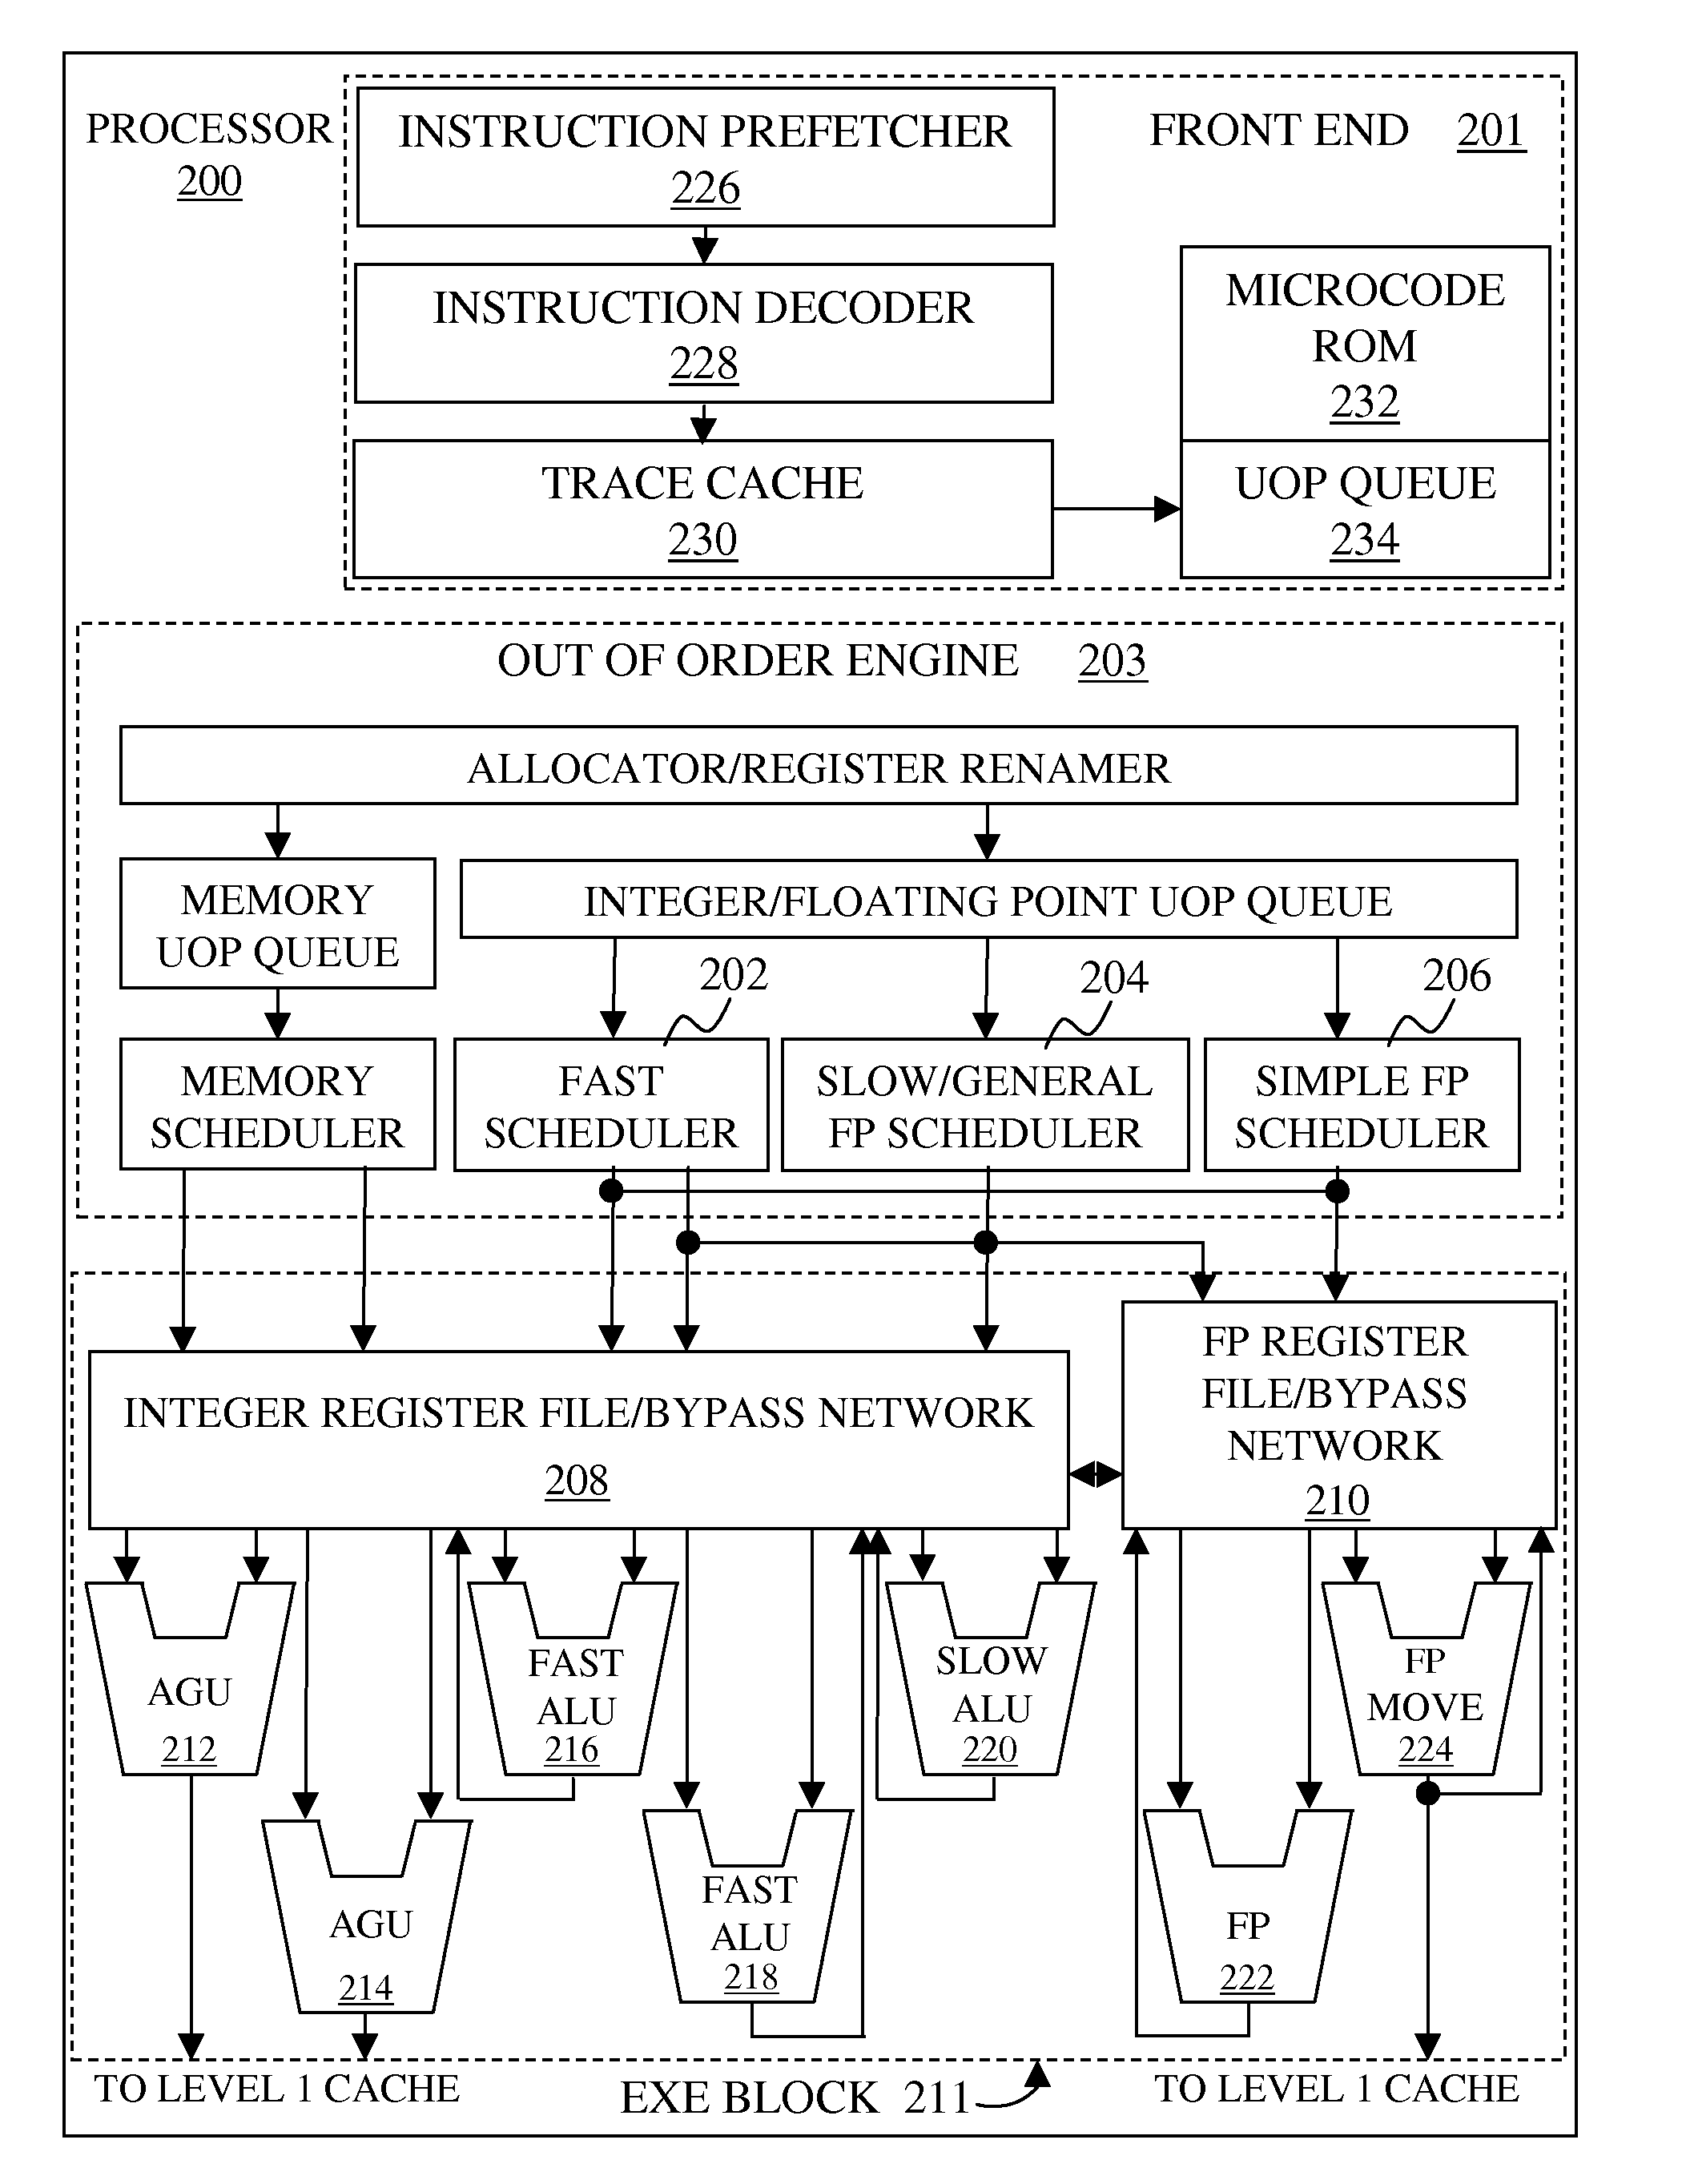 Fusible instructions and logic to provide or-test and and-test functionality using multiple test sources